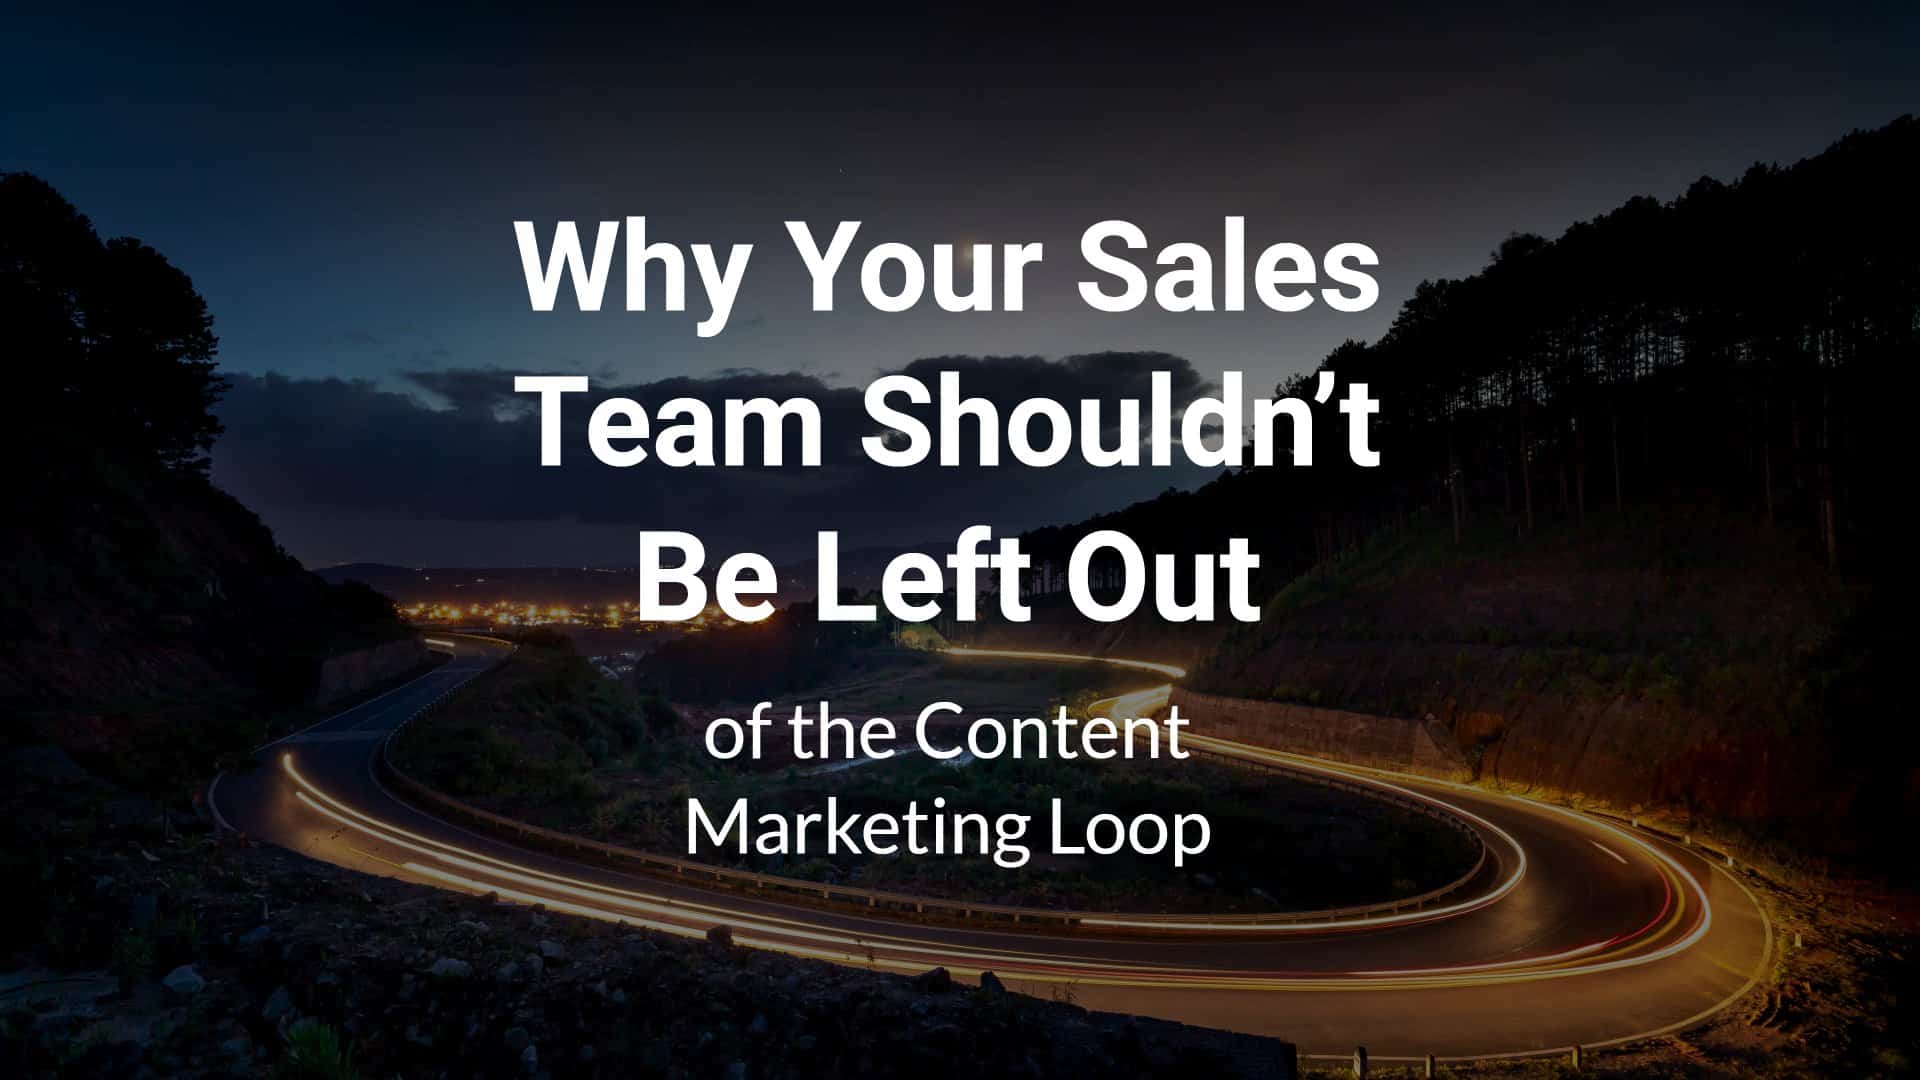 Why your sales team shouldn't be left out of the content marketing loop